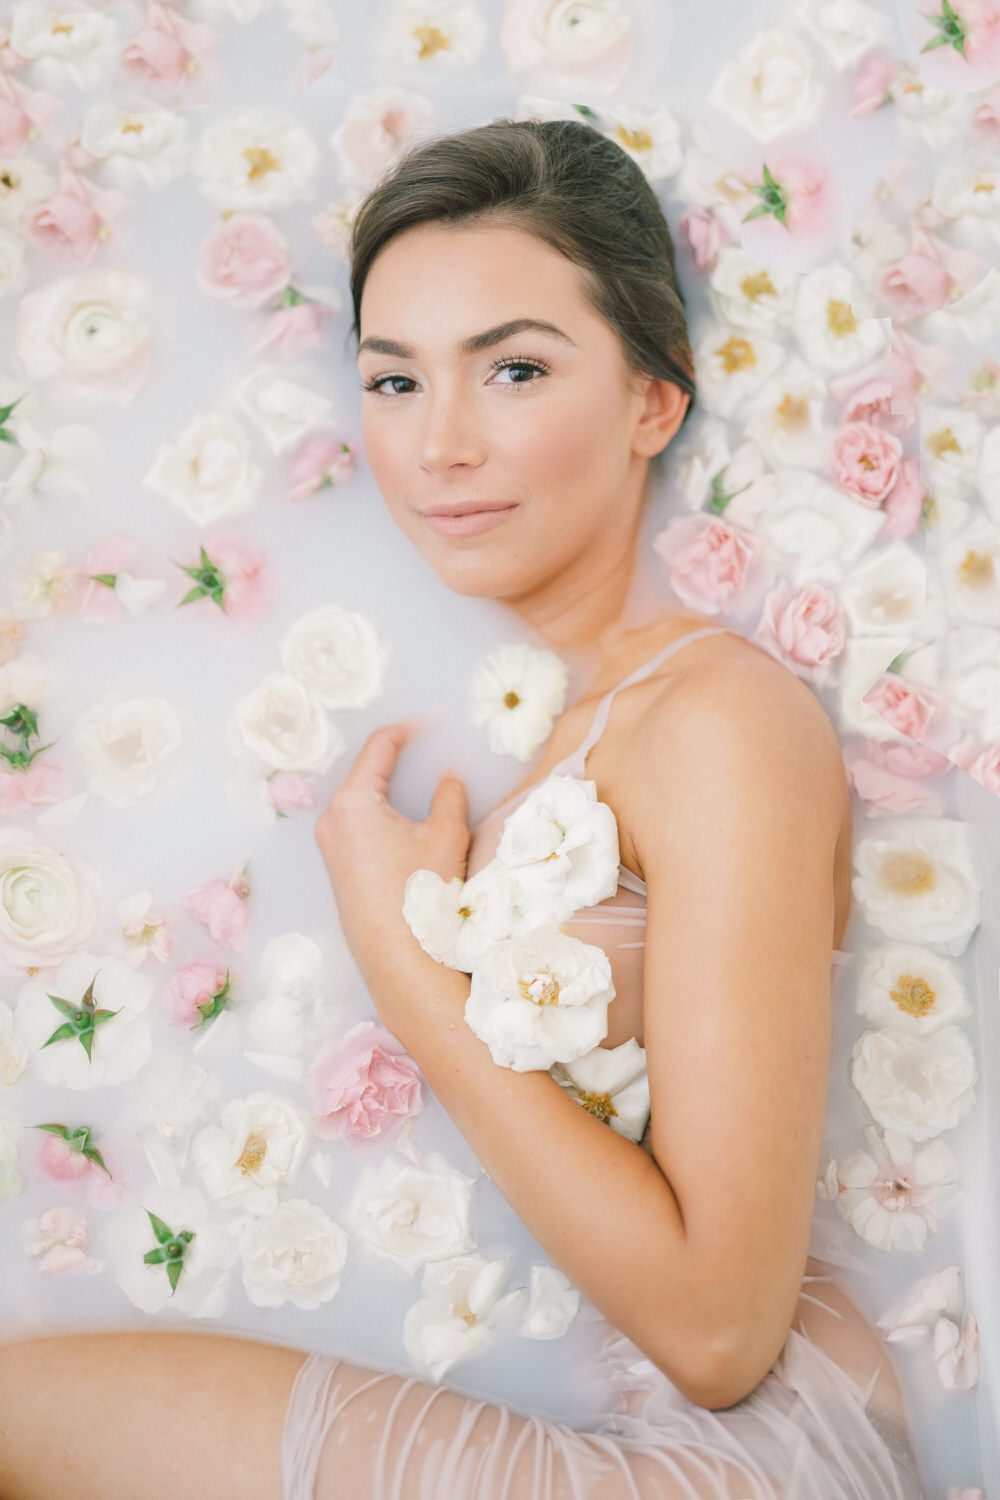 bride in a milk bath surrounded by pink and white flowers